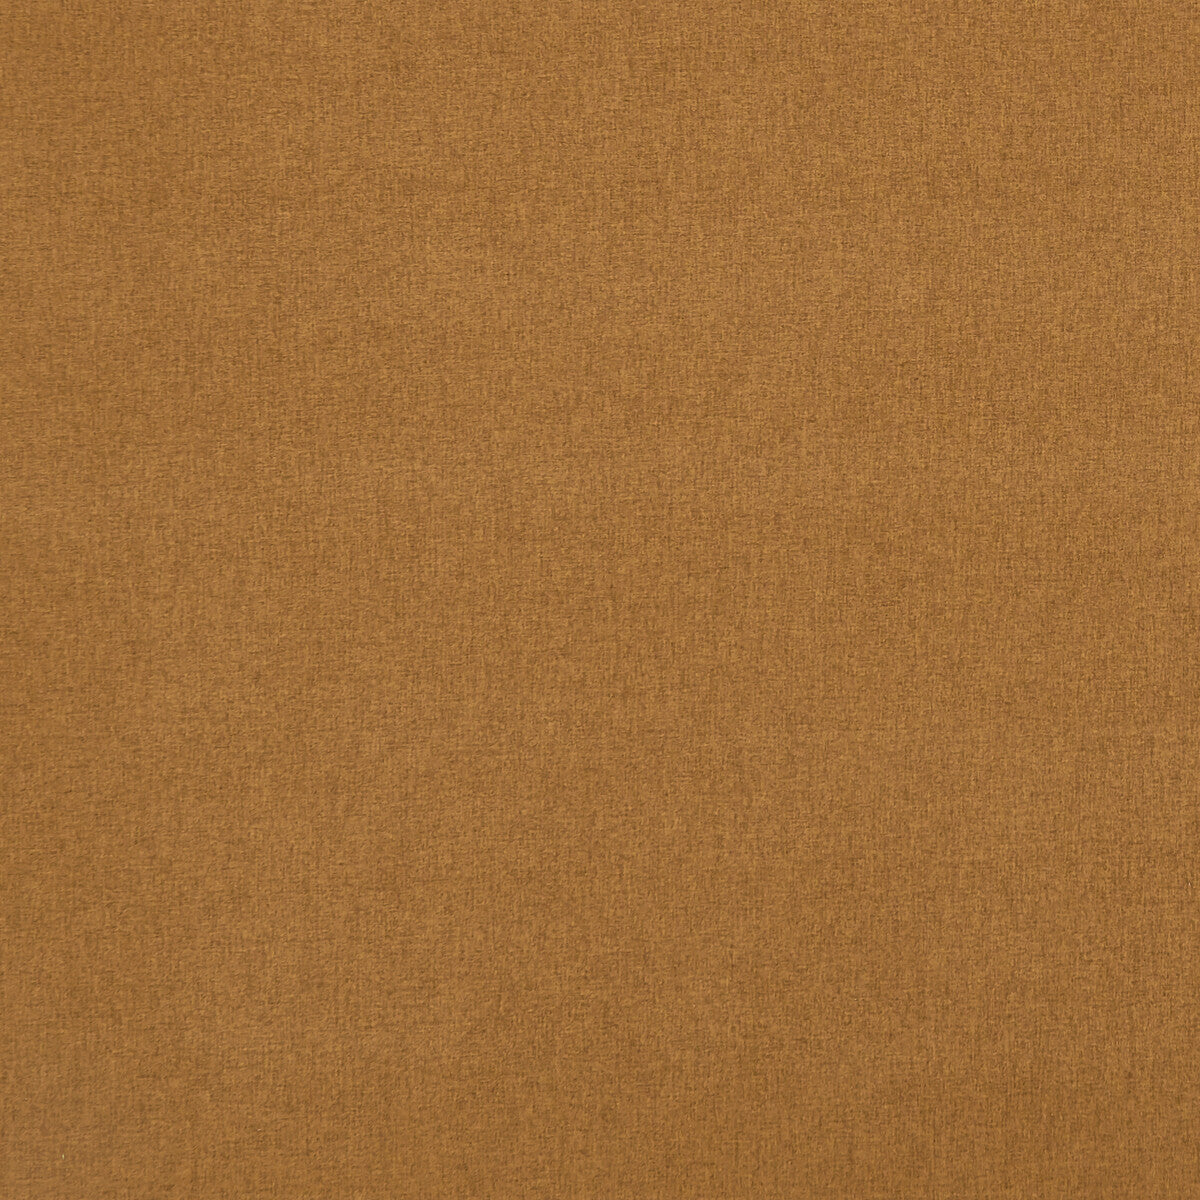 Highlander fabric in cinnamon color - pattern F0848/36.CAC.0 - by Clarke And Clarke in the Clarke &amp; Clarke Highlander 2 collection